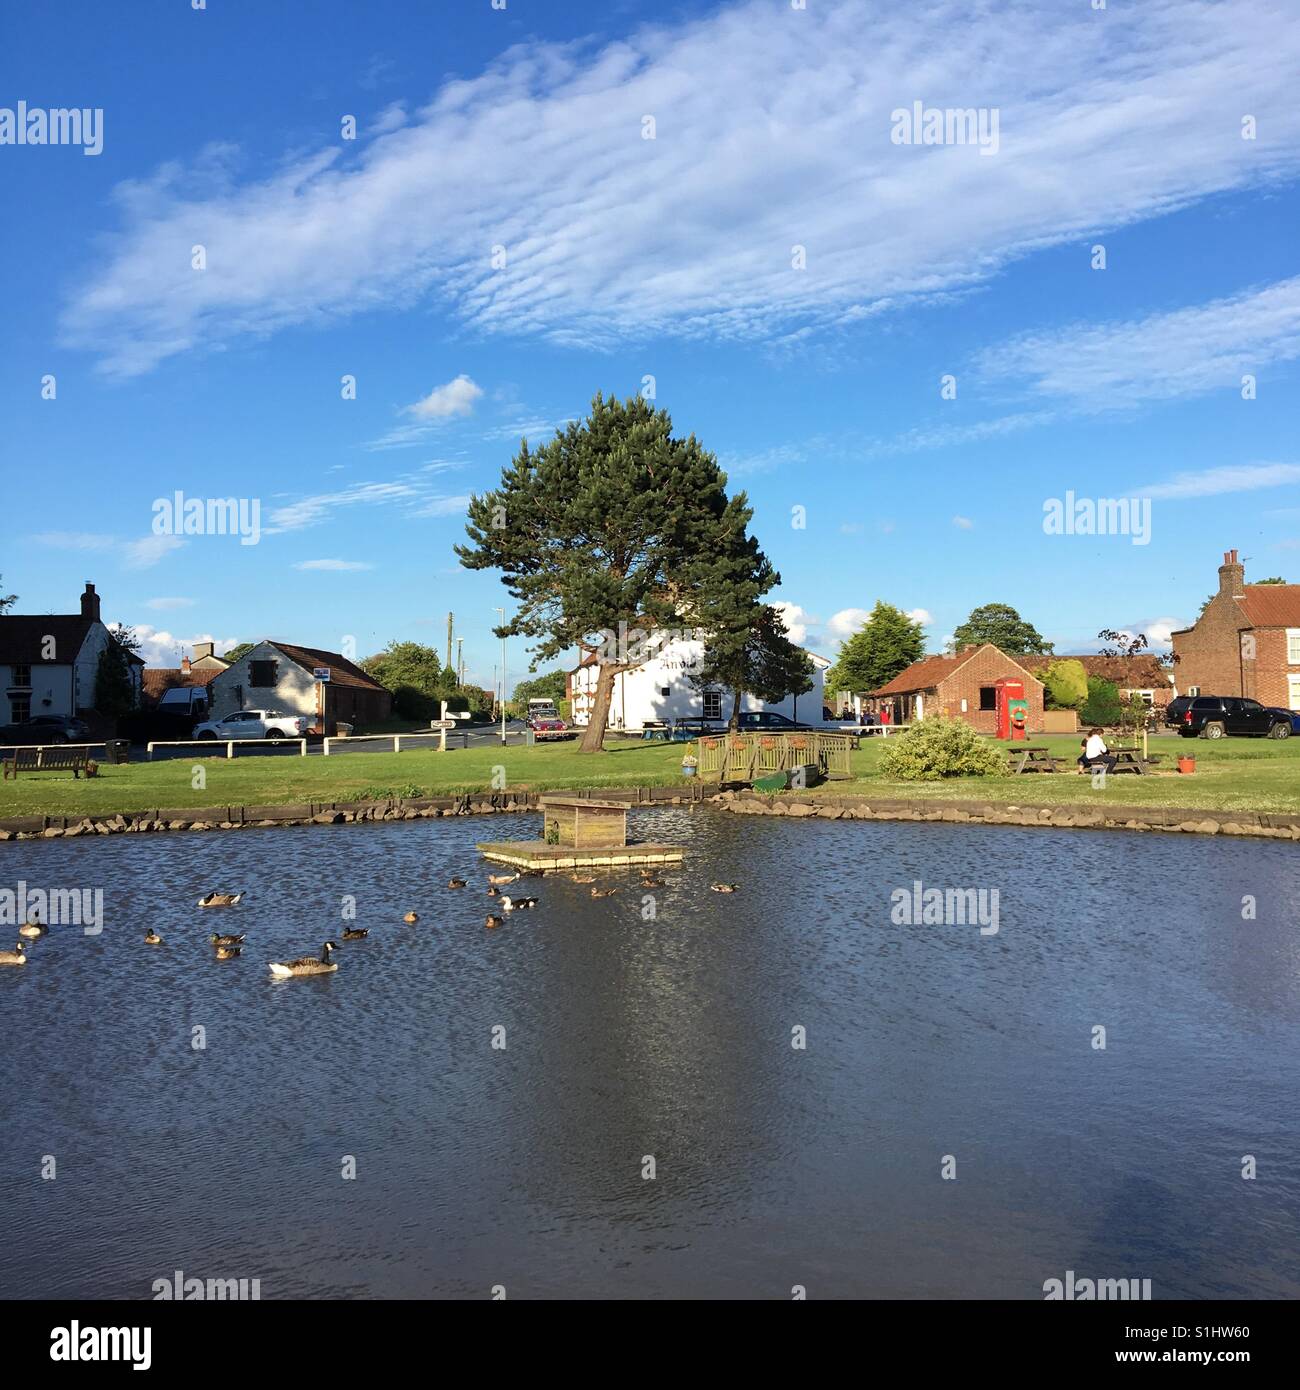 Village green and pond, Yorkshire Stock Photo